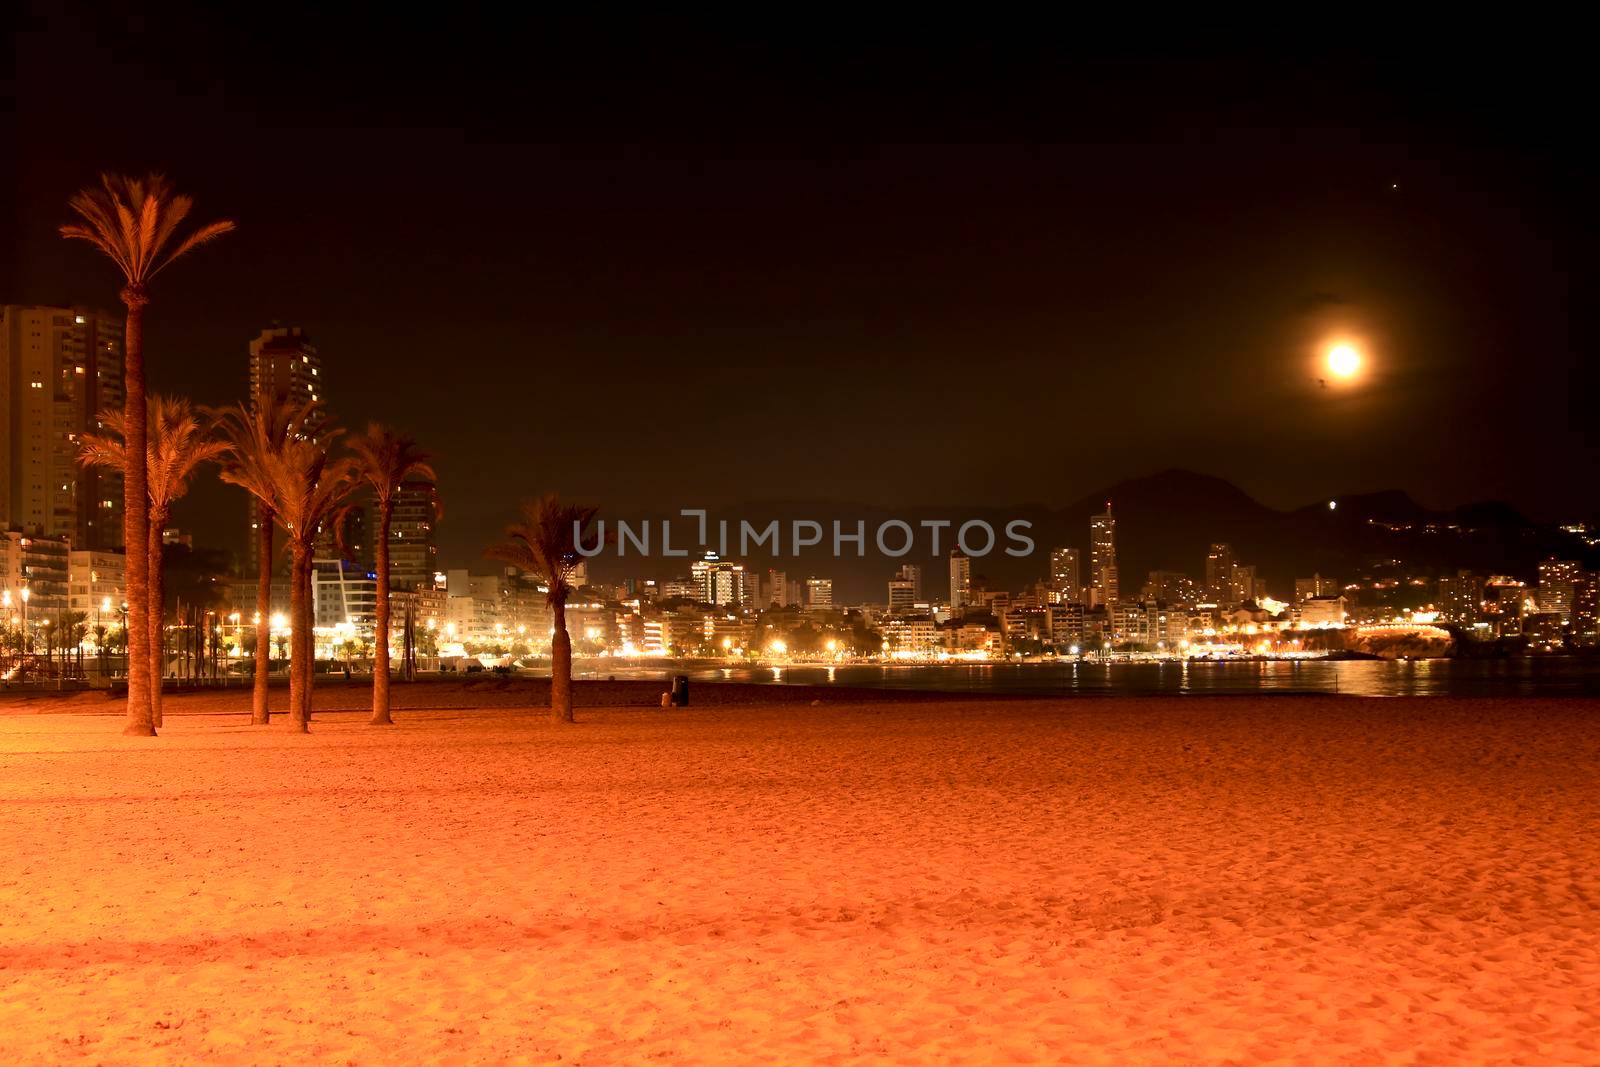 Panoramic view of Benidorm on a full moon night by soniabonet